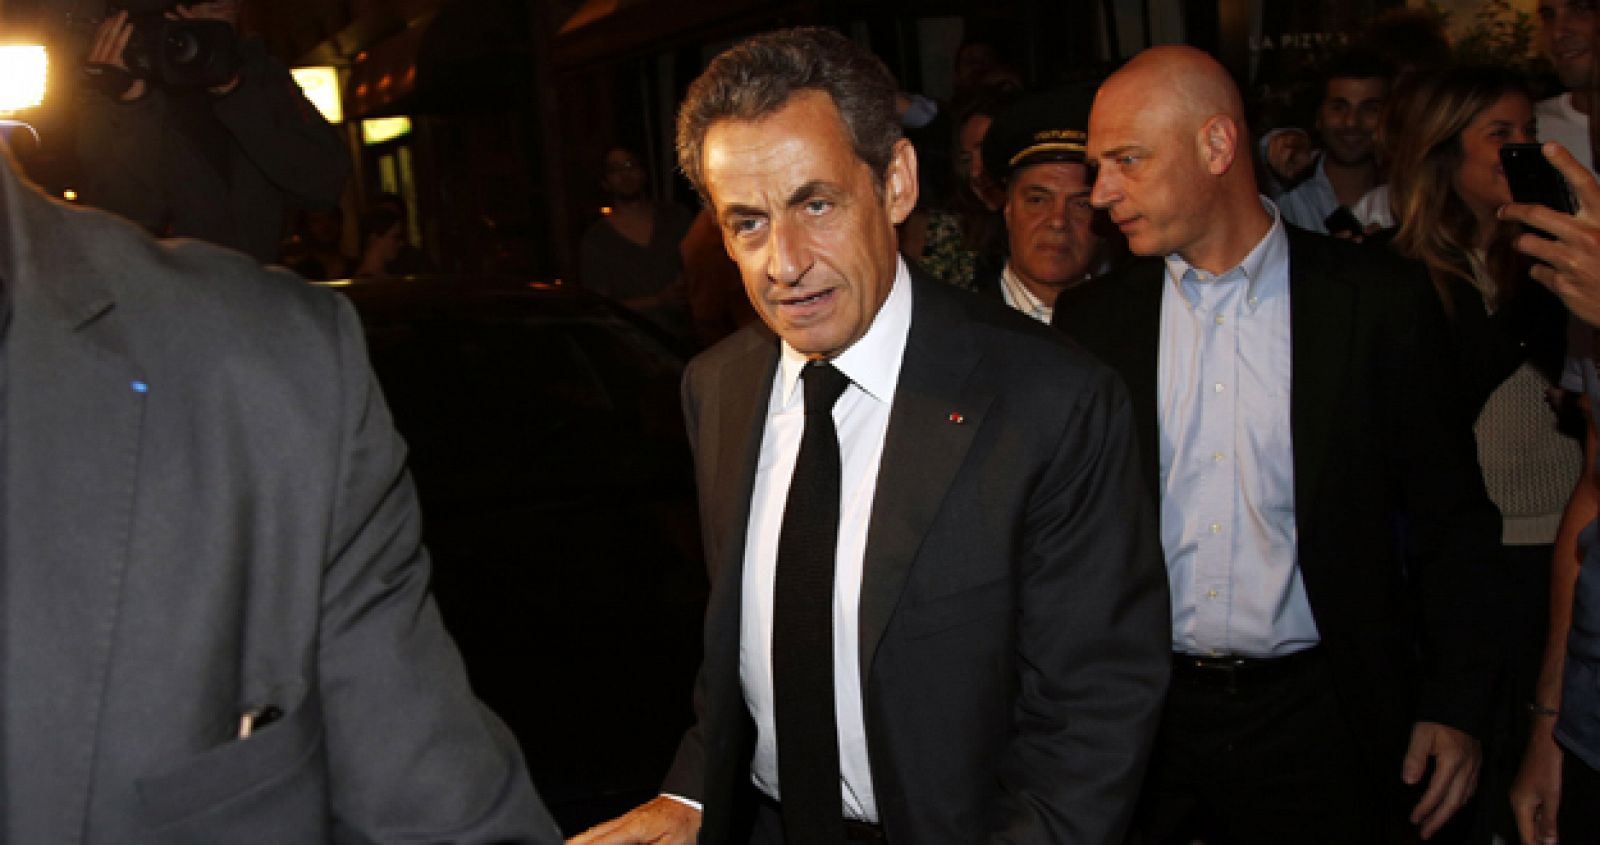 File picture shows former French president Nicolas Sarkozy leaving a restaurant in Paris